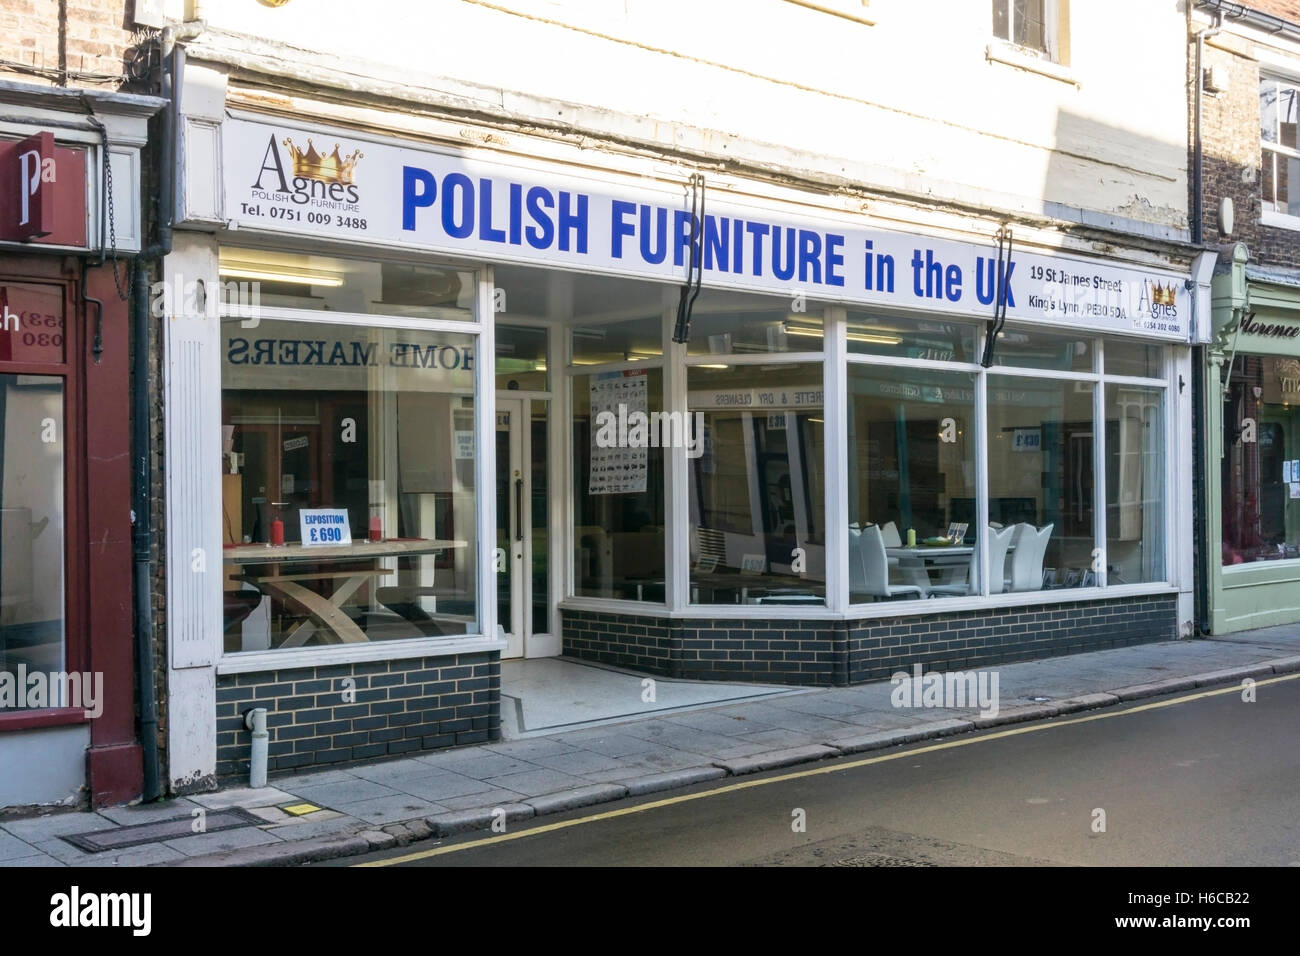 A branch of Agnes Furniture selling Polish furniture in King's Lynn, Norfolk. Stock Photo